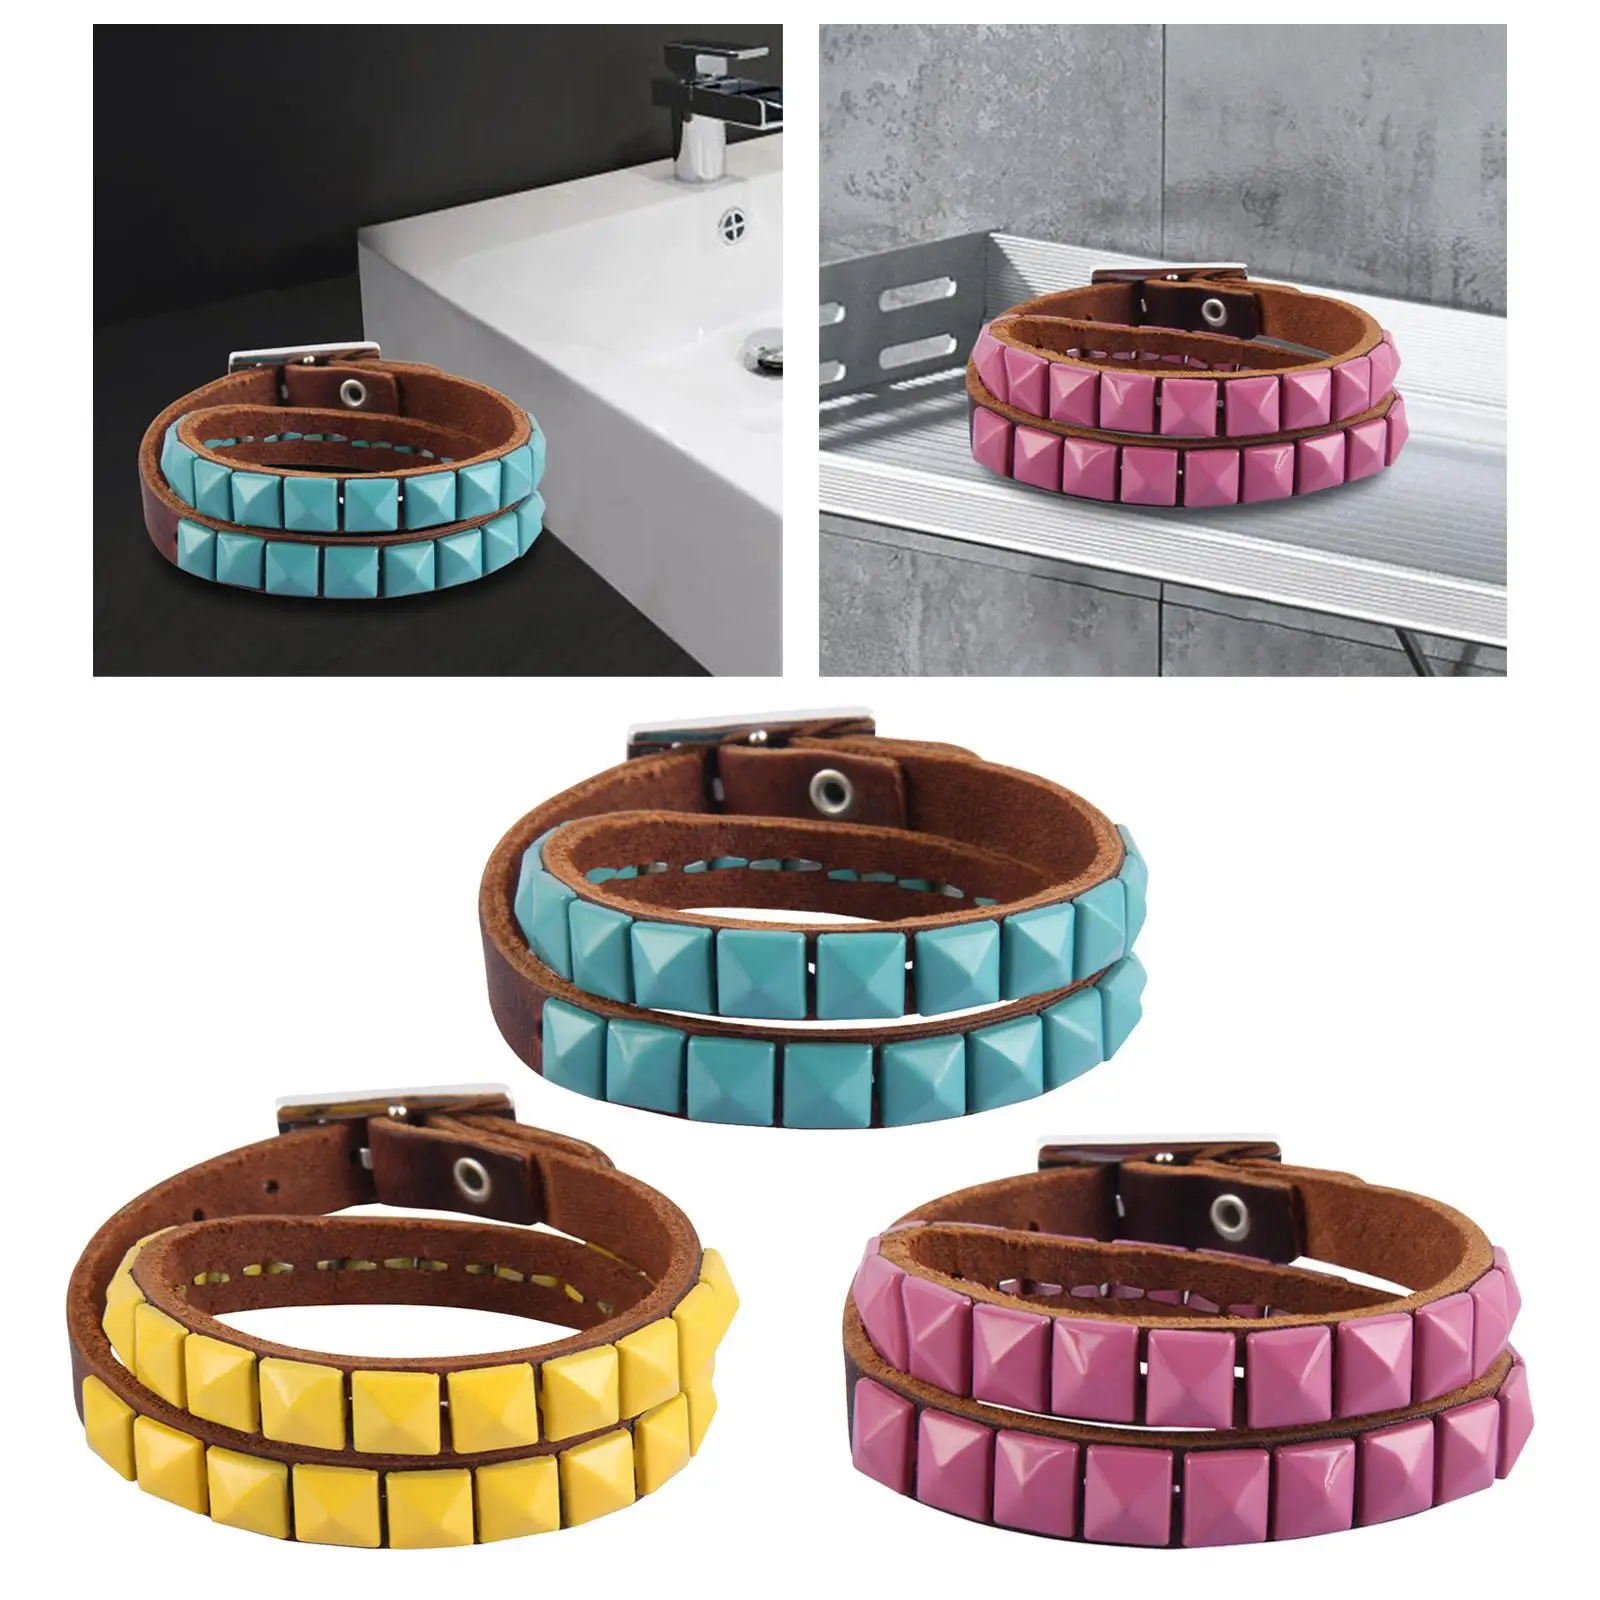 Punk Studded Bracelet Adjustable PU Leather Cuff Bangle Jewelry for Men Women Party Favors Wedding Holiday Prom Daily wearing